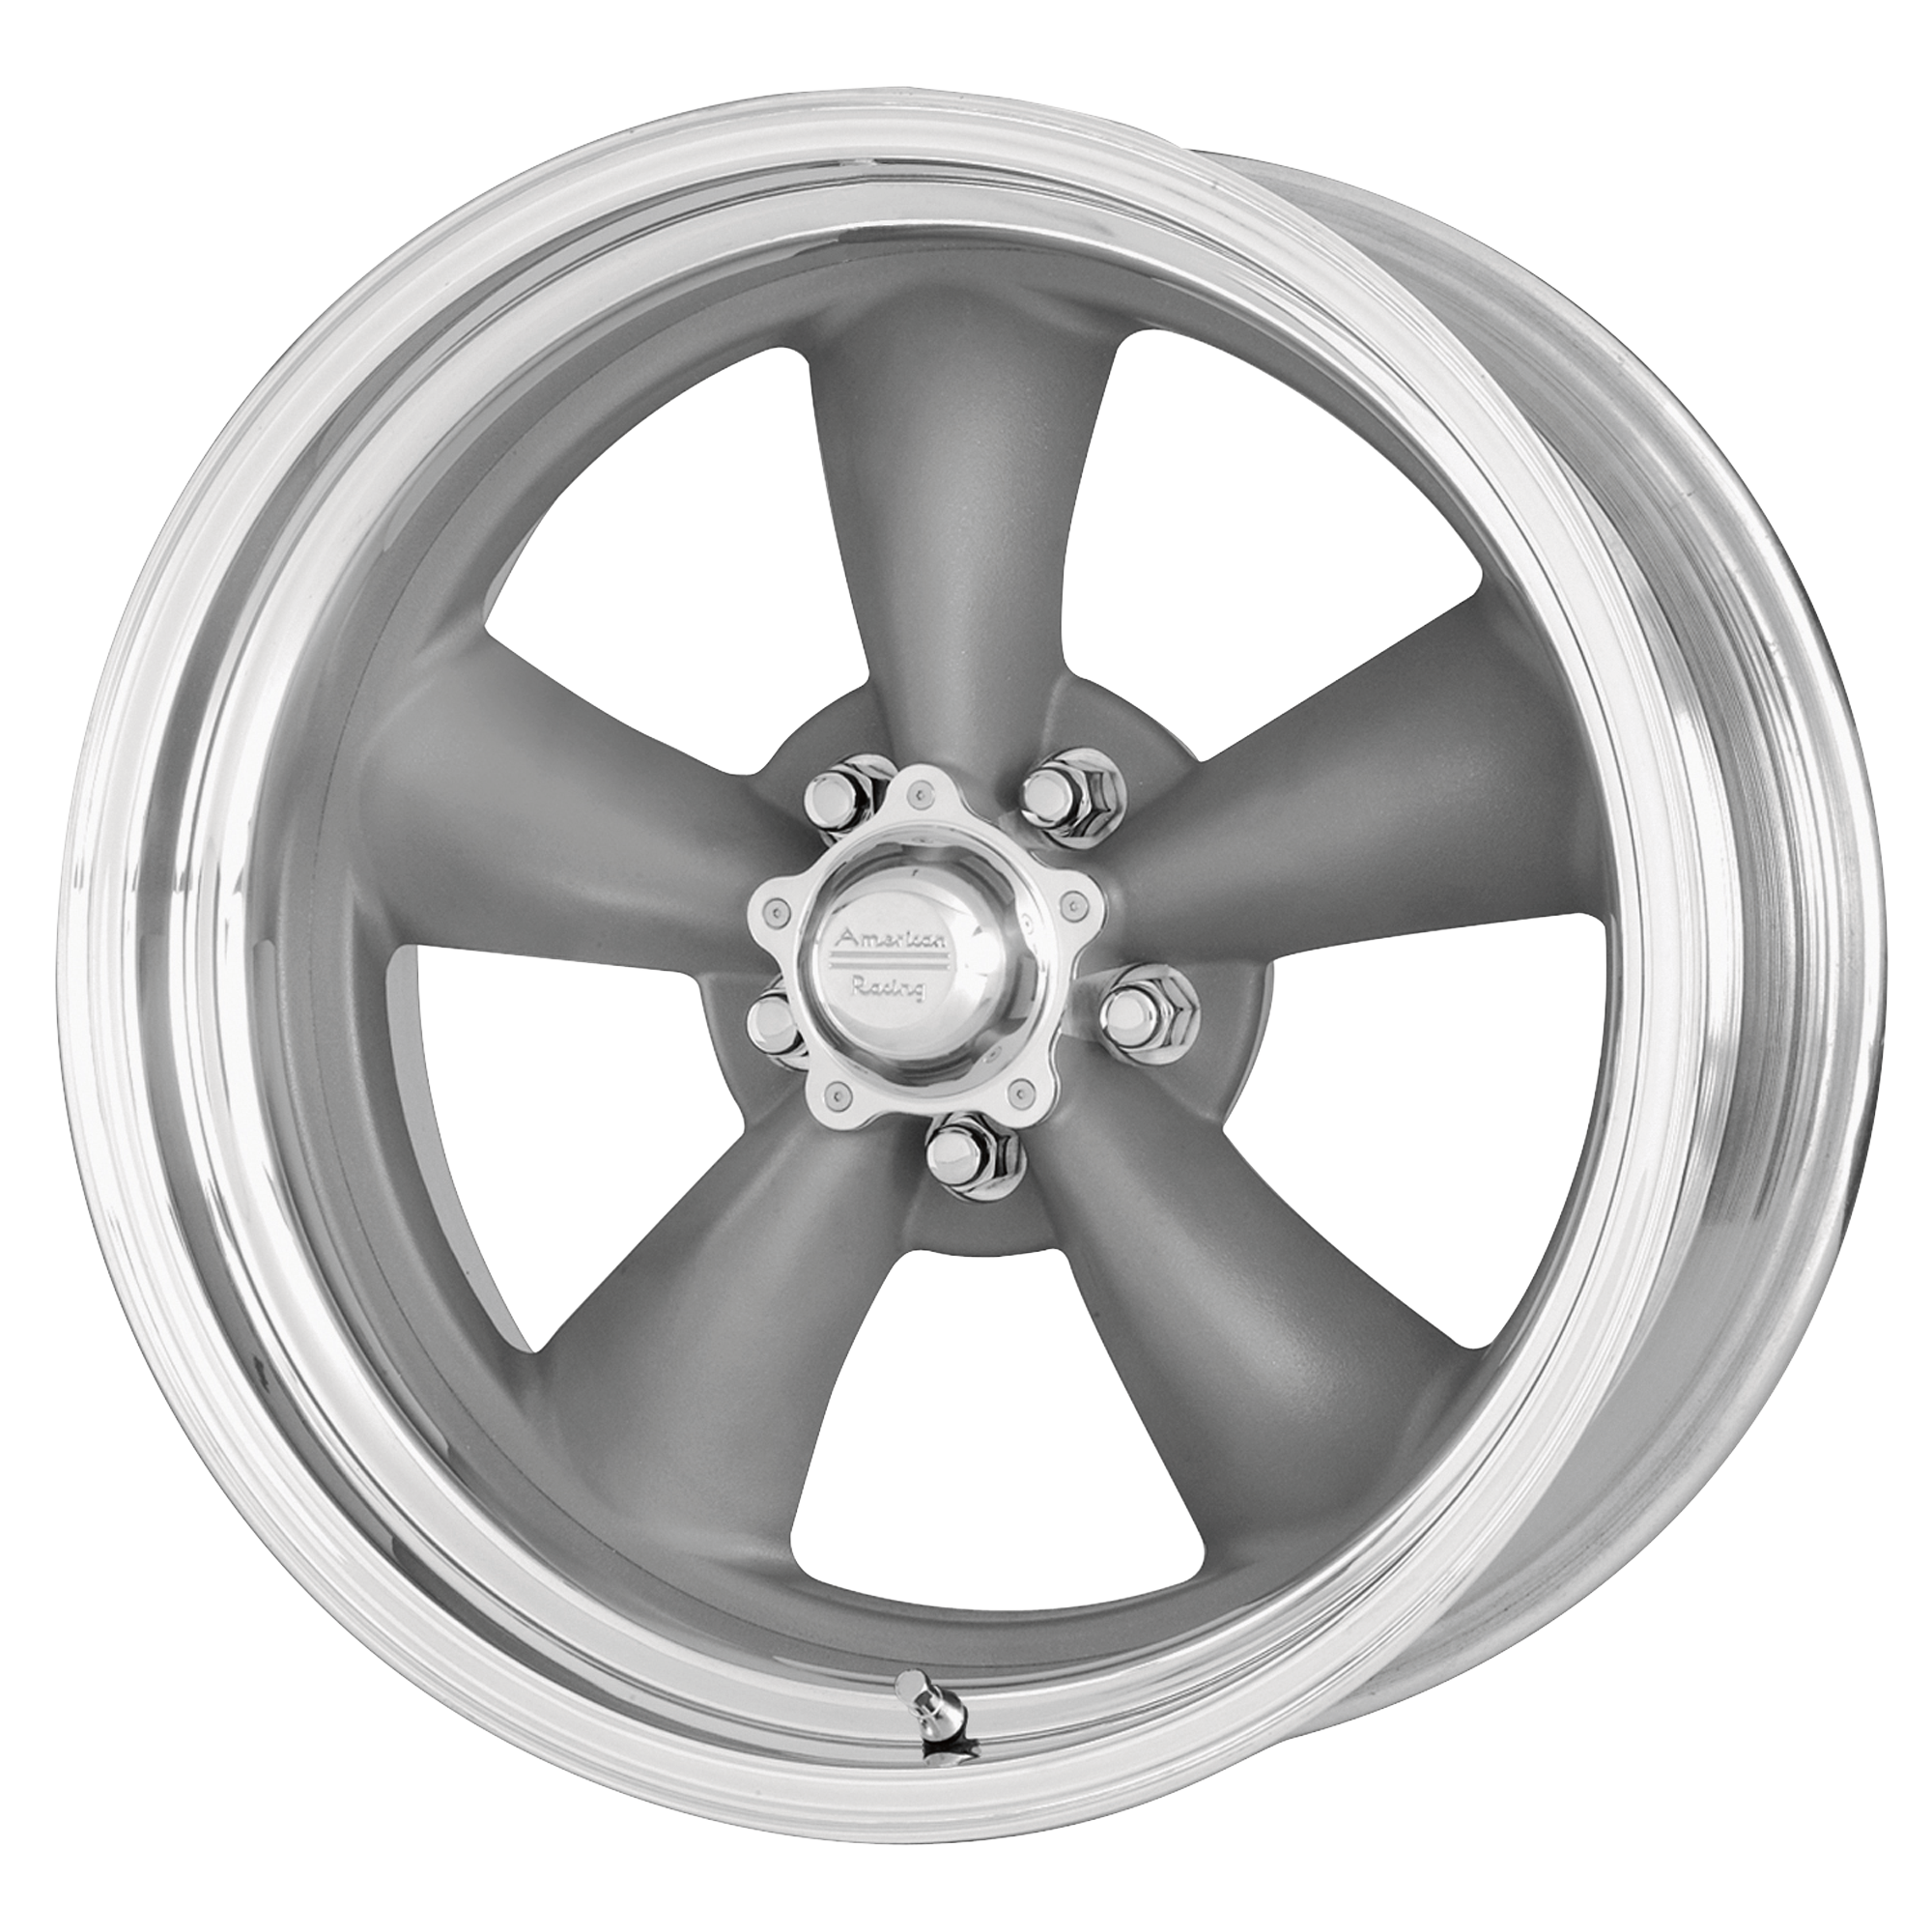 CLASSIC TORQ THRUST II ONE PIECE 20x8 5x120.65 MAG GRAY W/ MACHINED LIP (0 mm) - Tires and Engine Performance